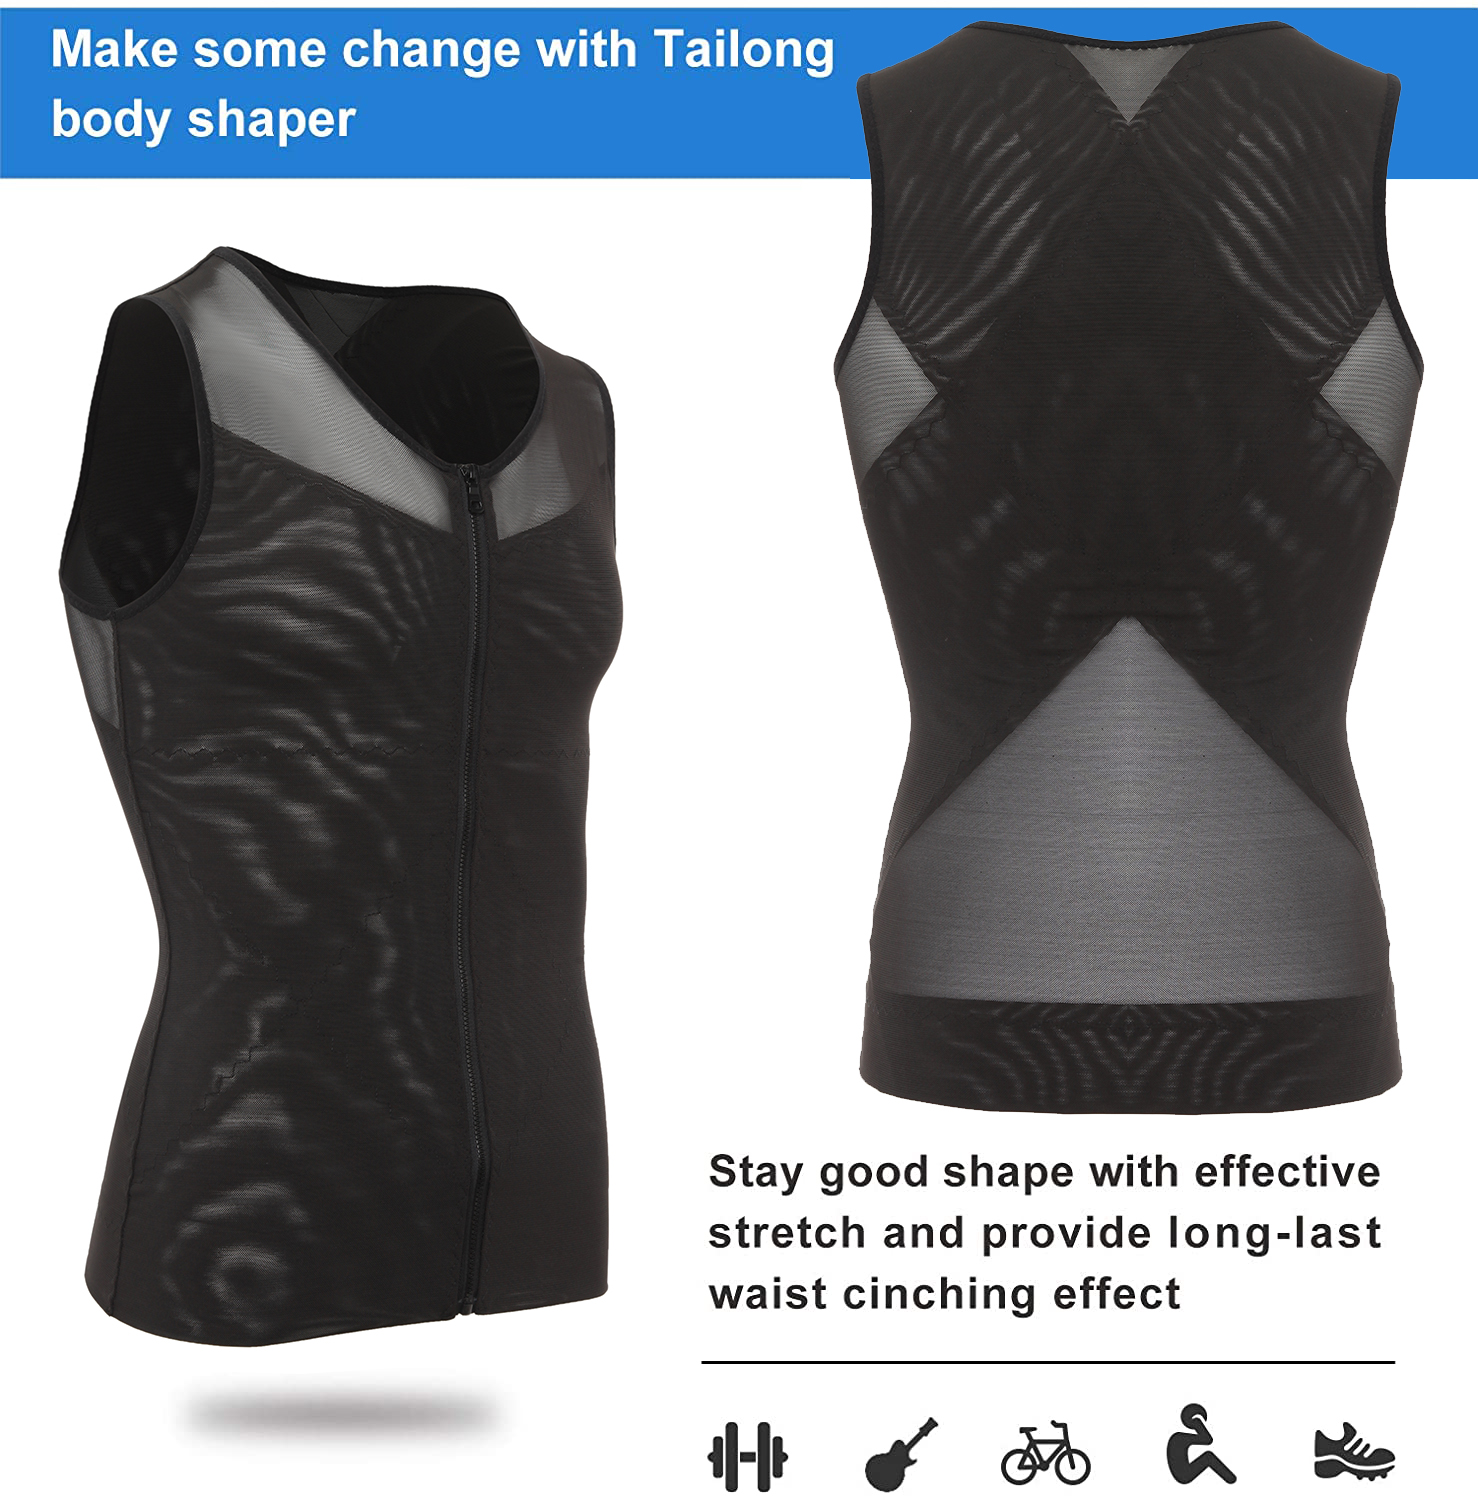  TAILONG Mens Compression Shirt For Body Shaper